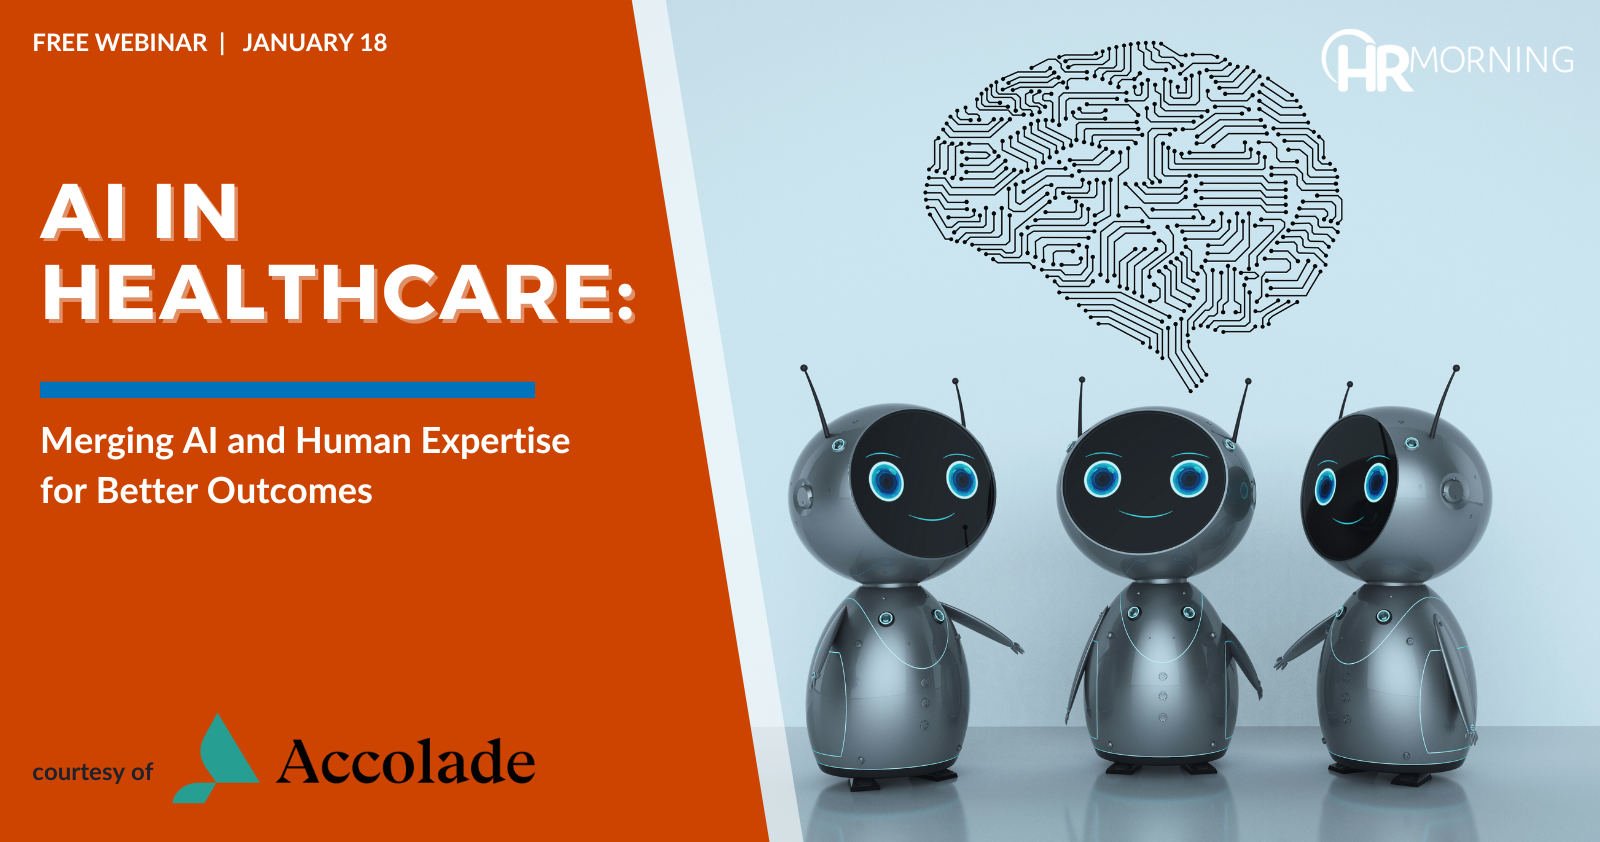 AI in Healthcare a free webinar from Accolade